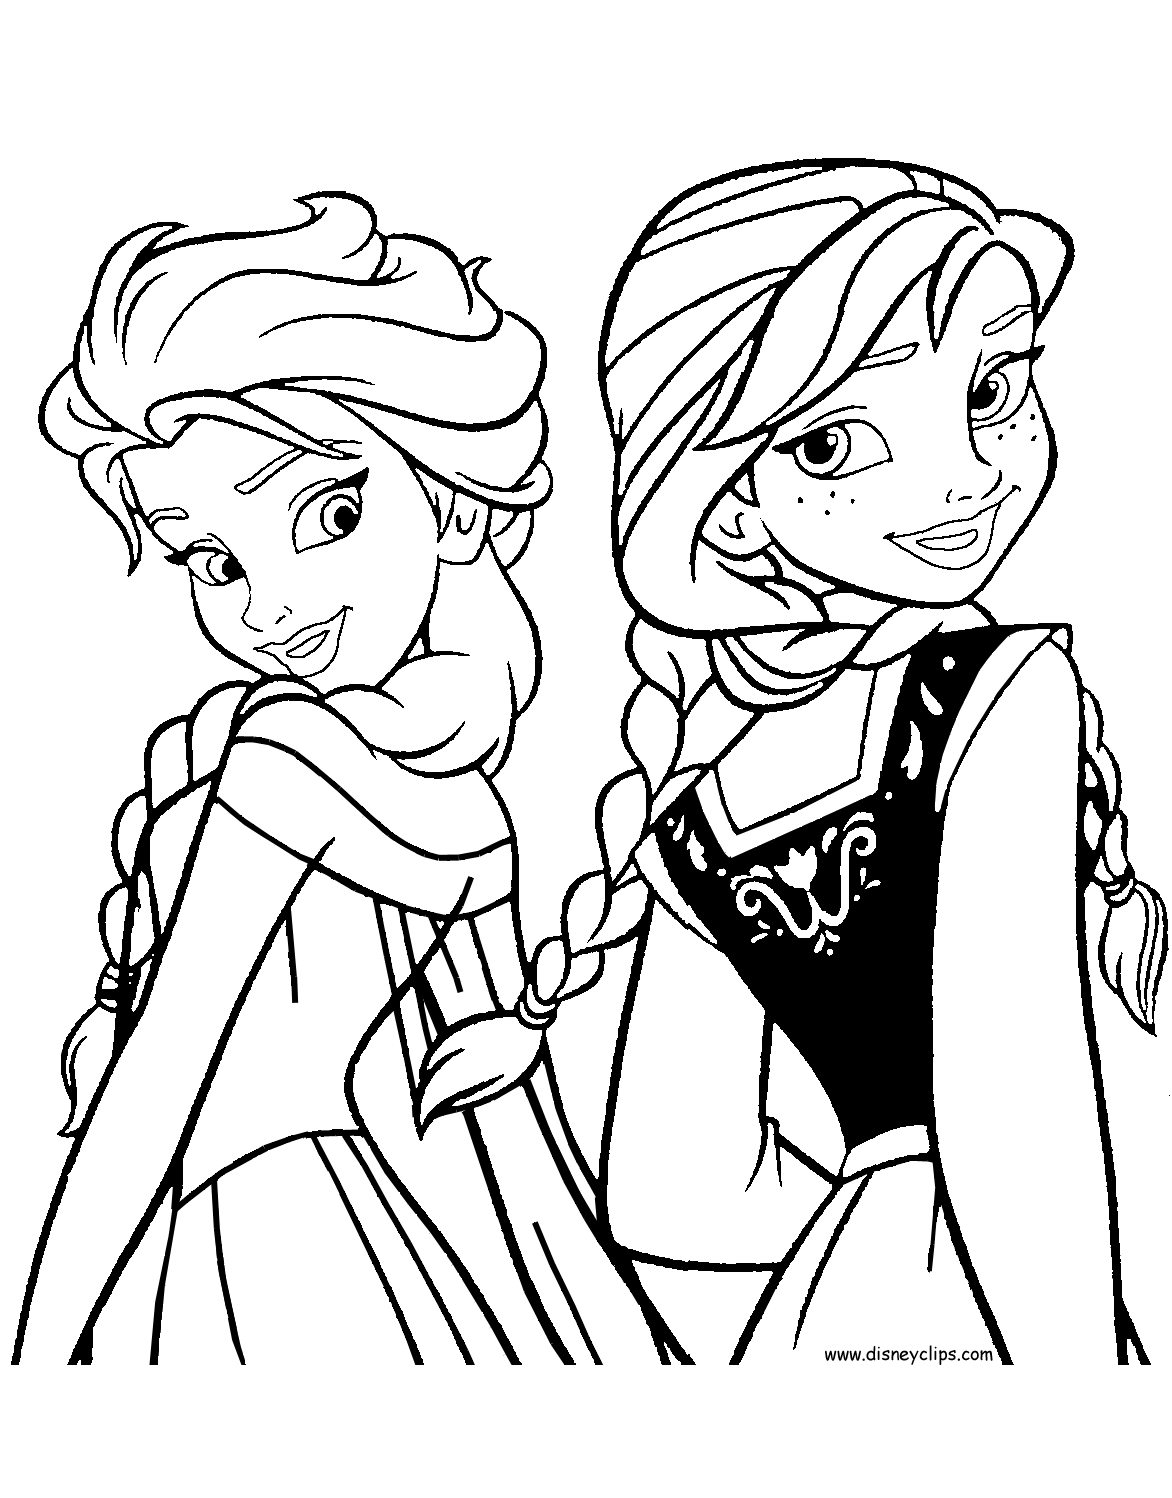 printable colouring pages frozen free printable frozen coloring pages for kids best pages printable colouring frozen 